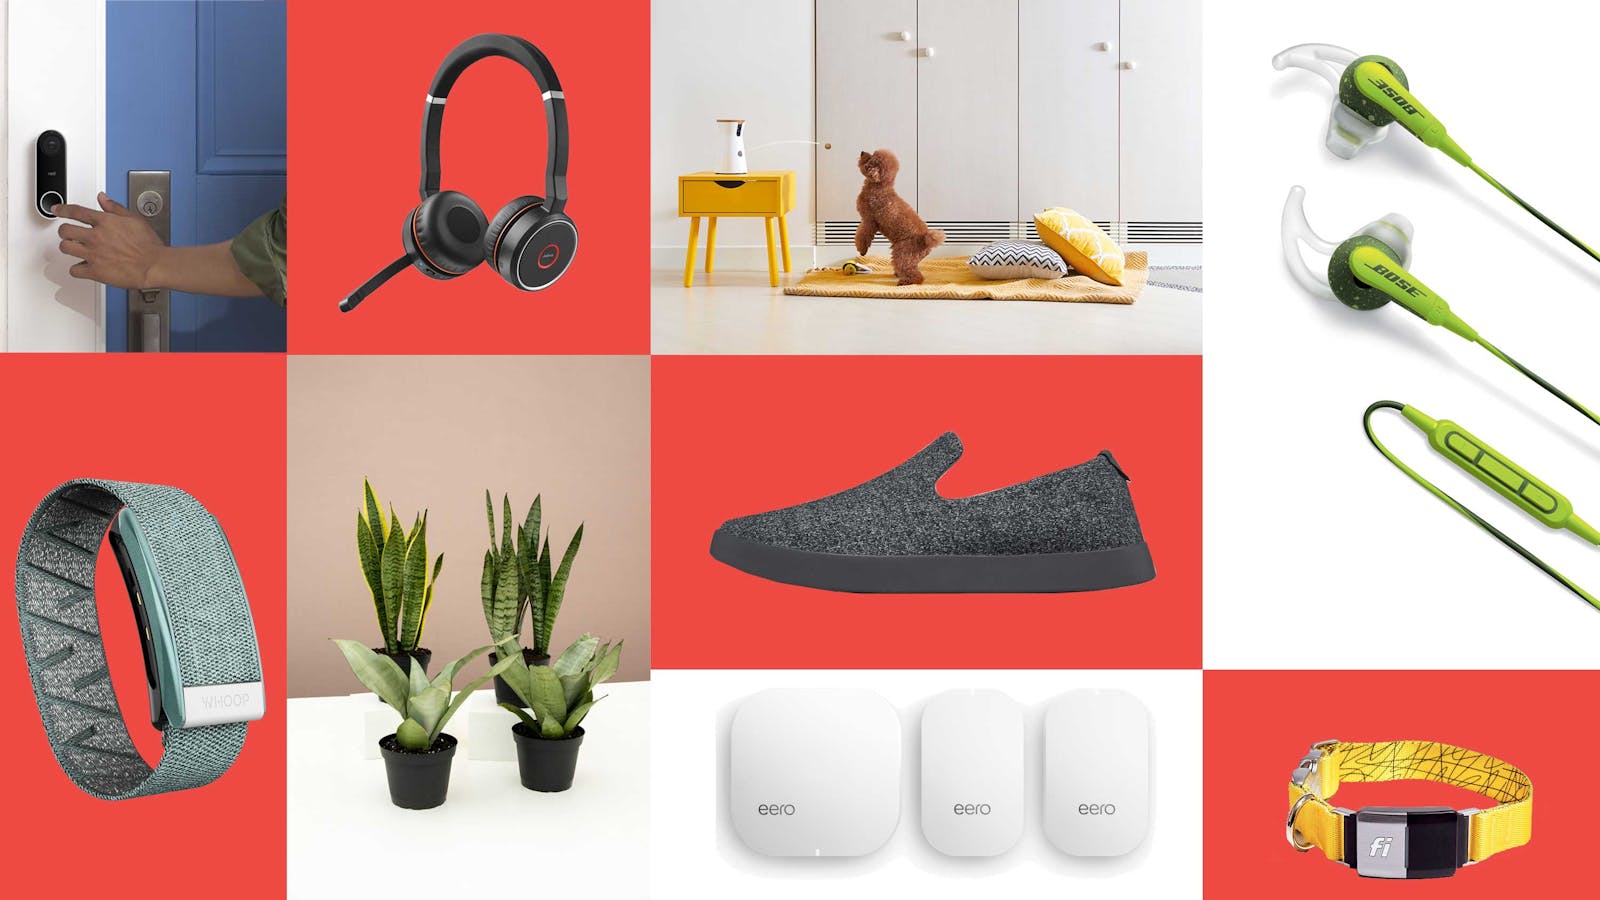 The Best Holiday Gifts for Remote Workers: A Complete Guide